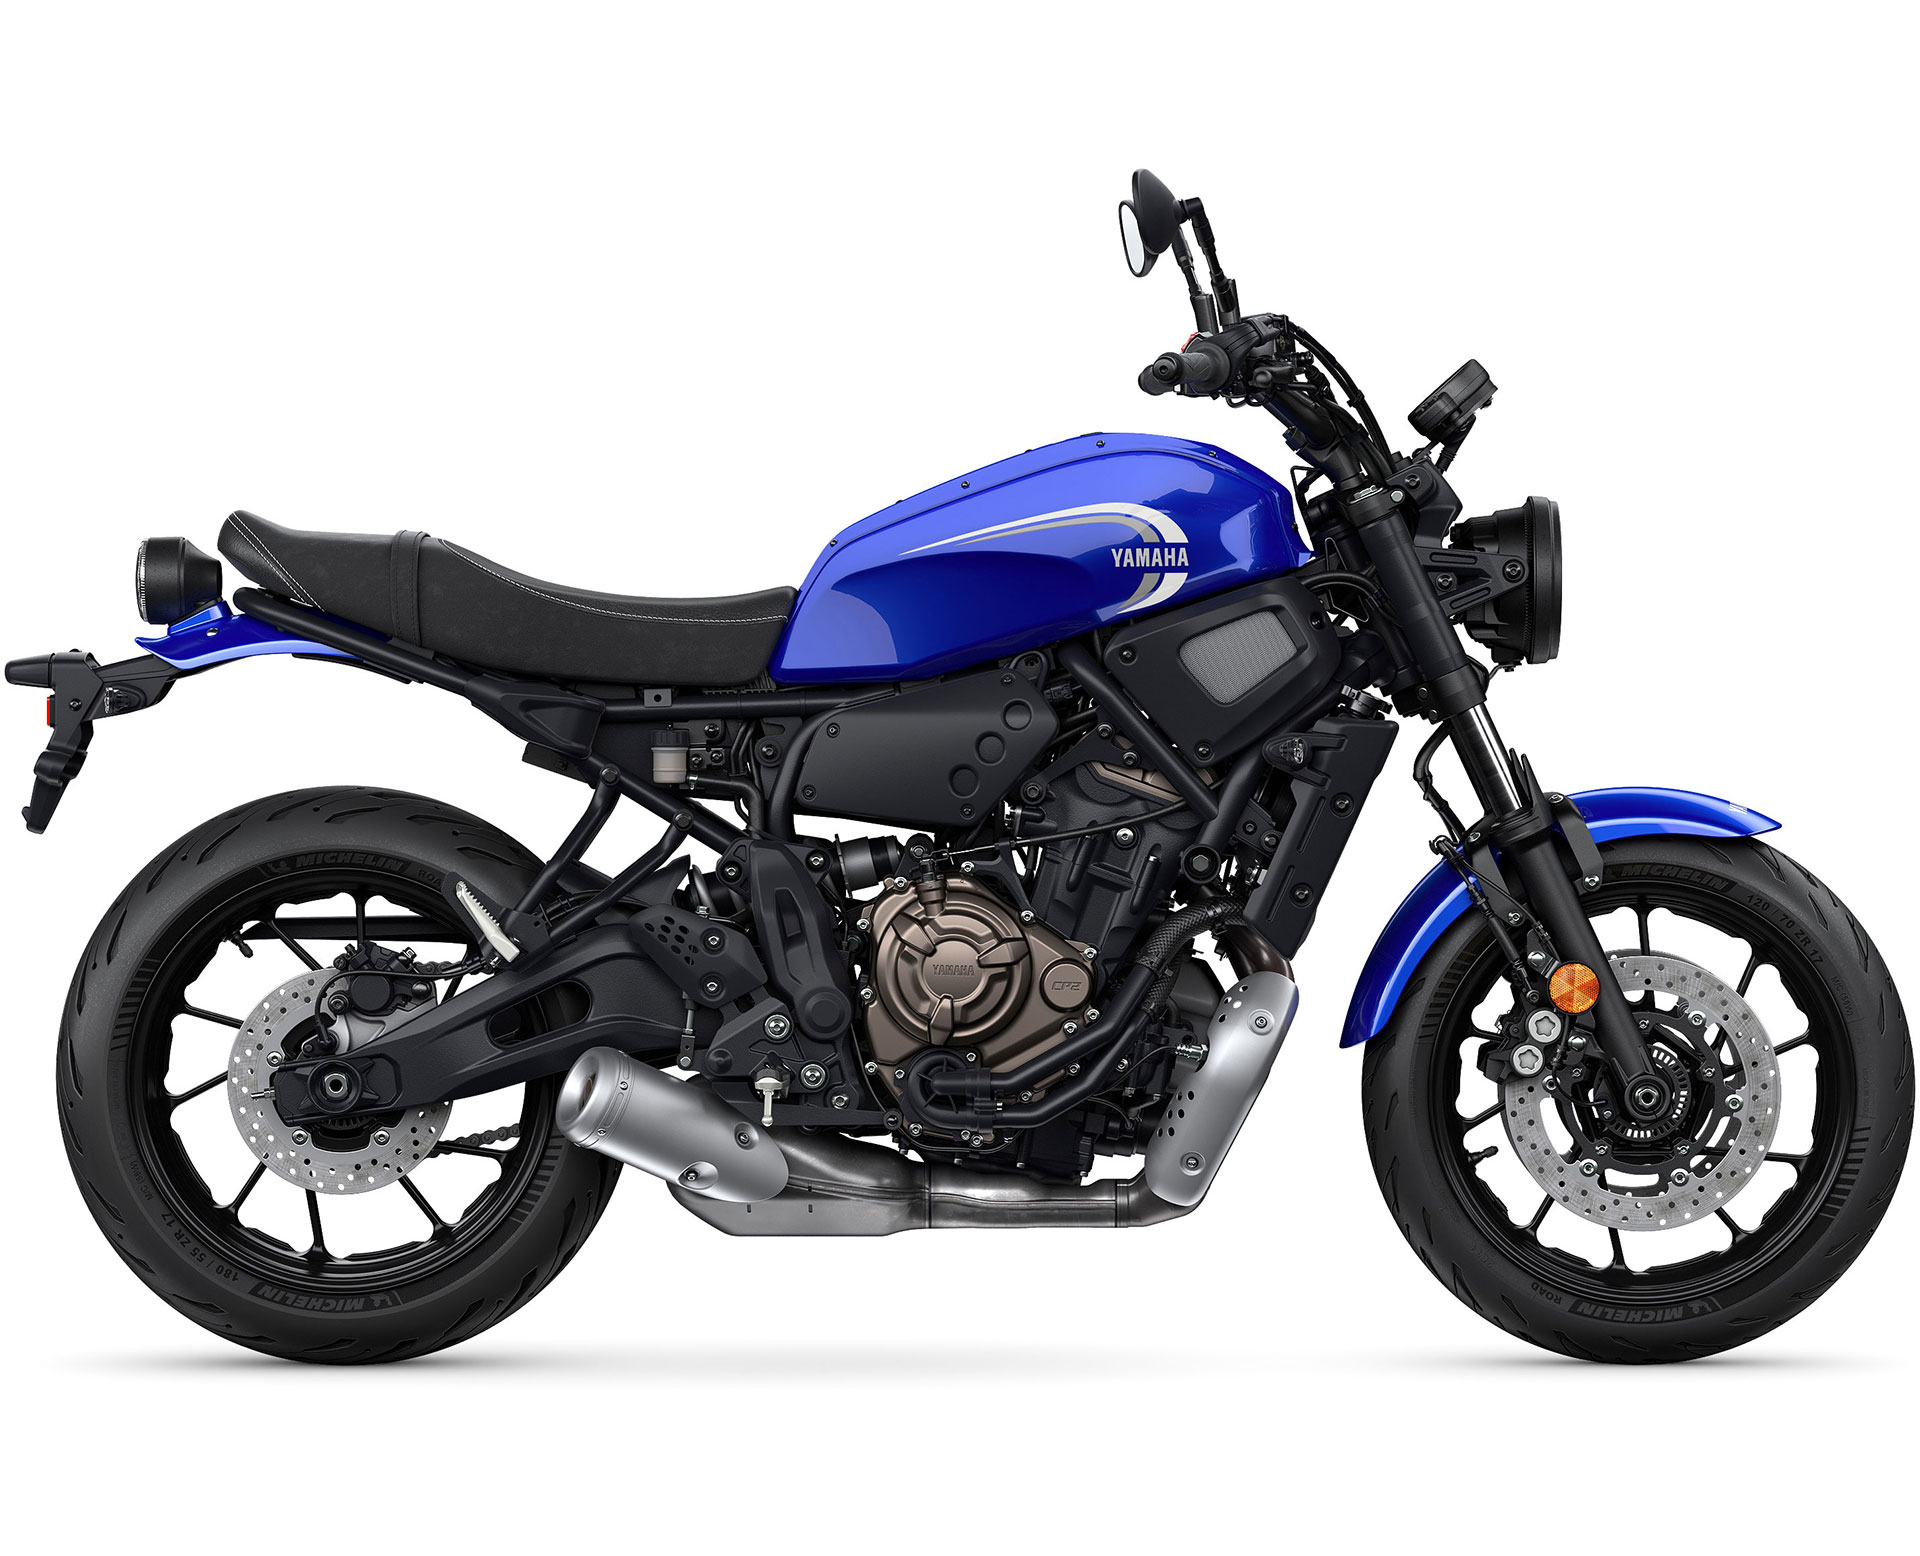 Thumbnail of your customized XSR700 2024